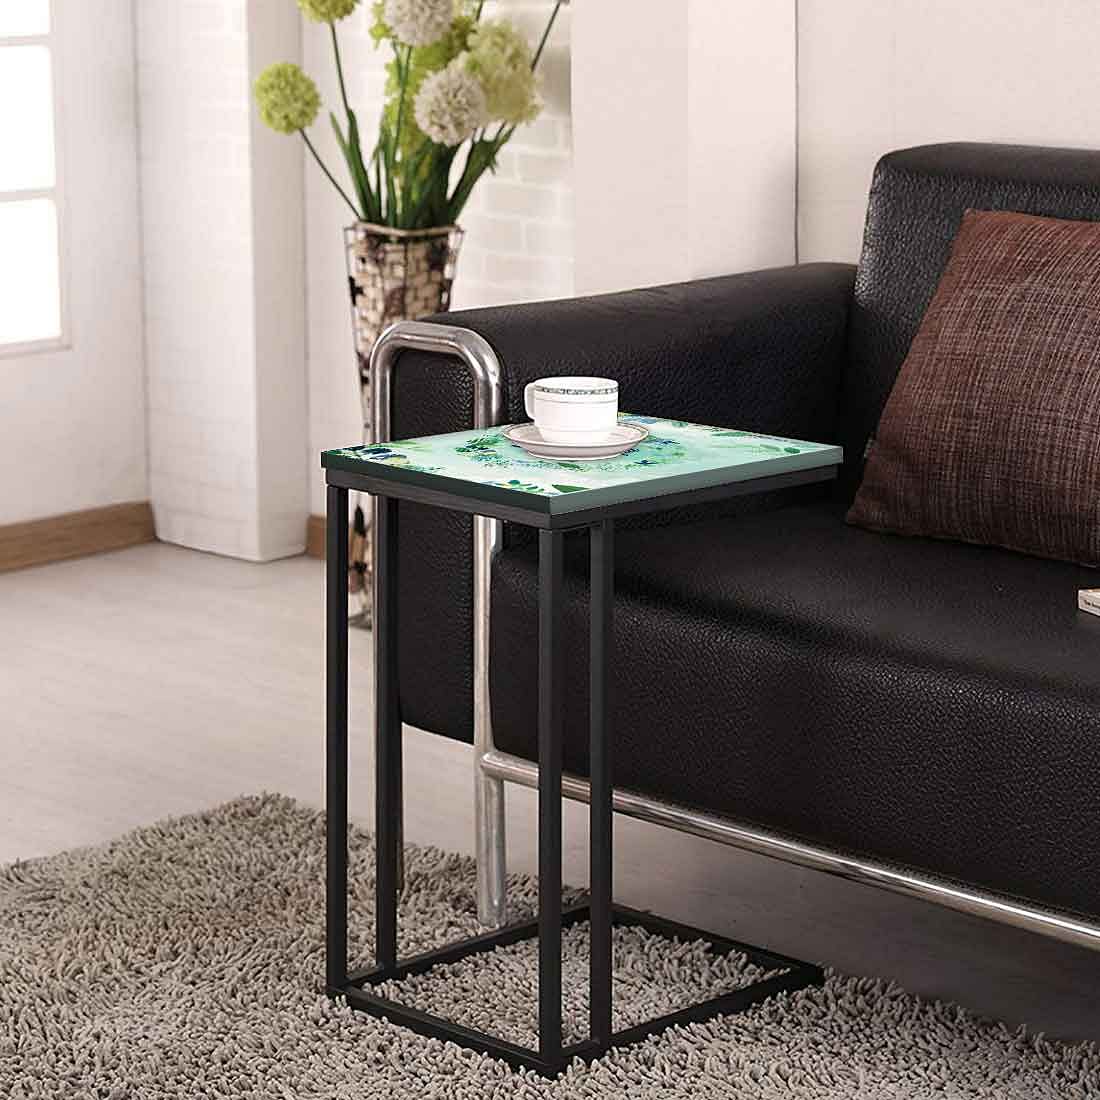 New Modern C Table For Sofa - Life is Beautiful Nutcase